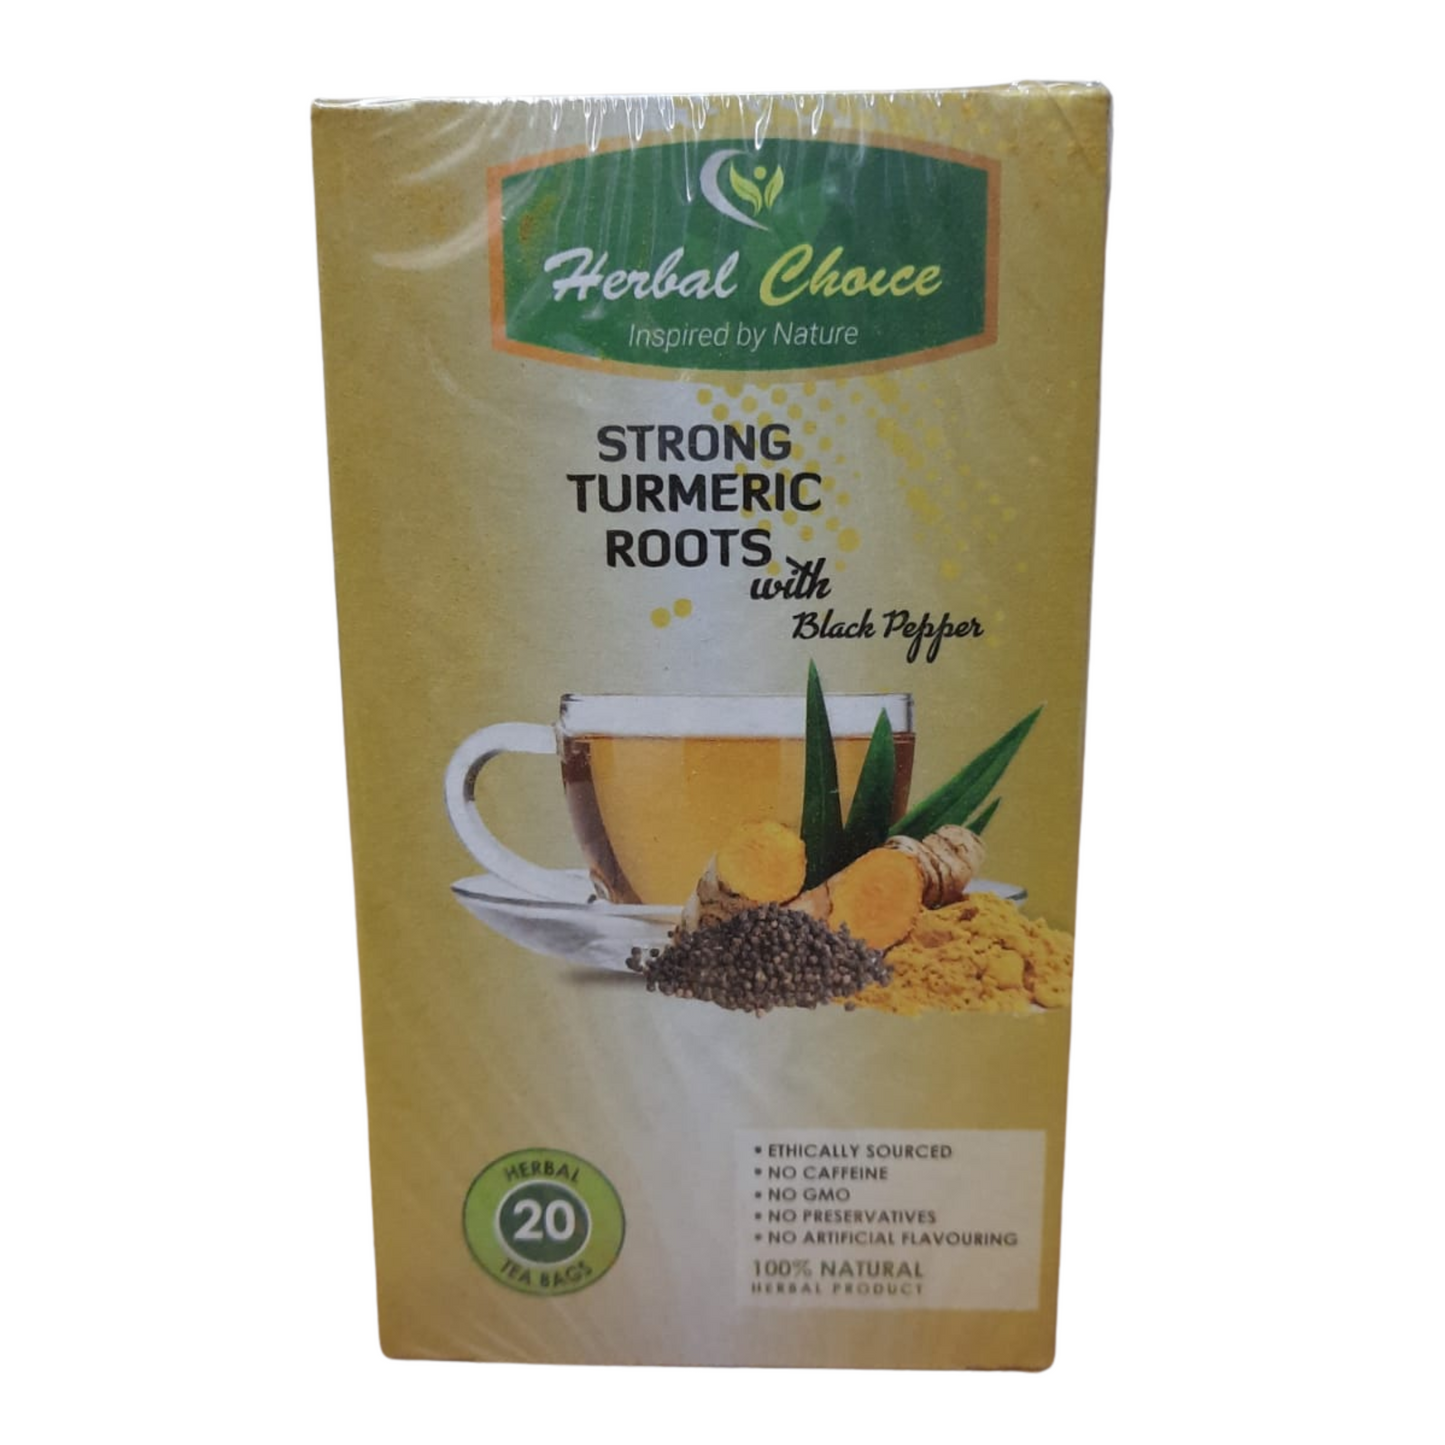 Herbal Choice Strong Turmeric Roots with Black Pepper Tea - 20 Tea Bags